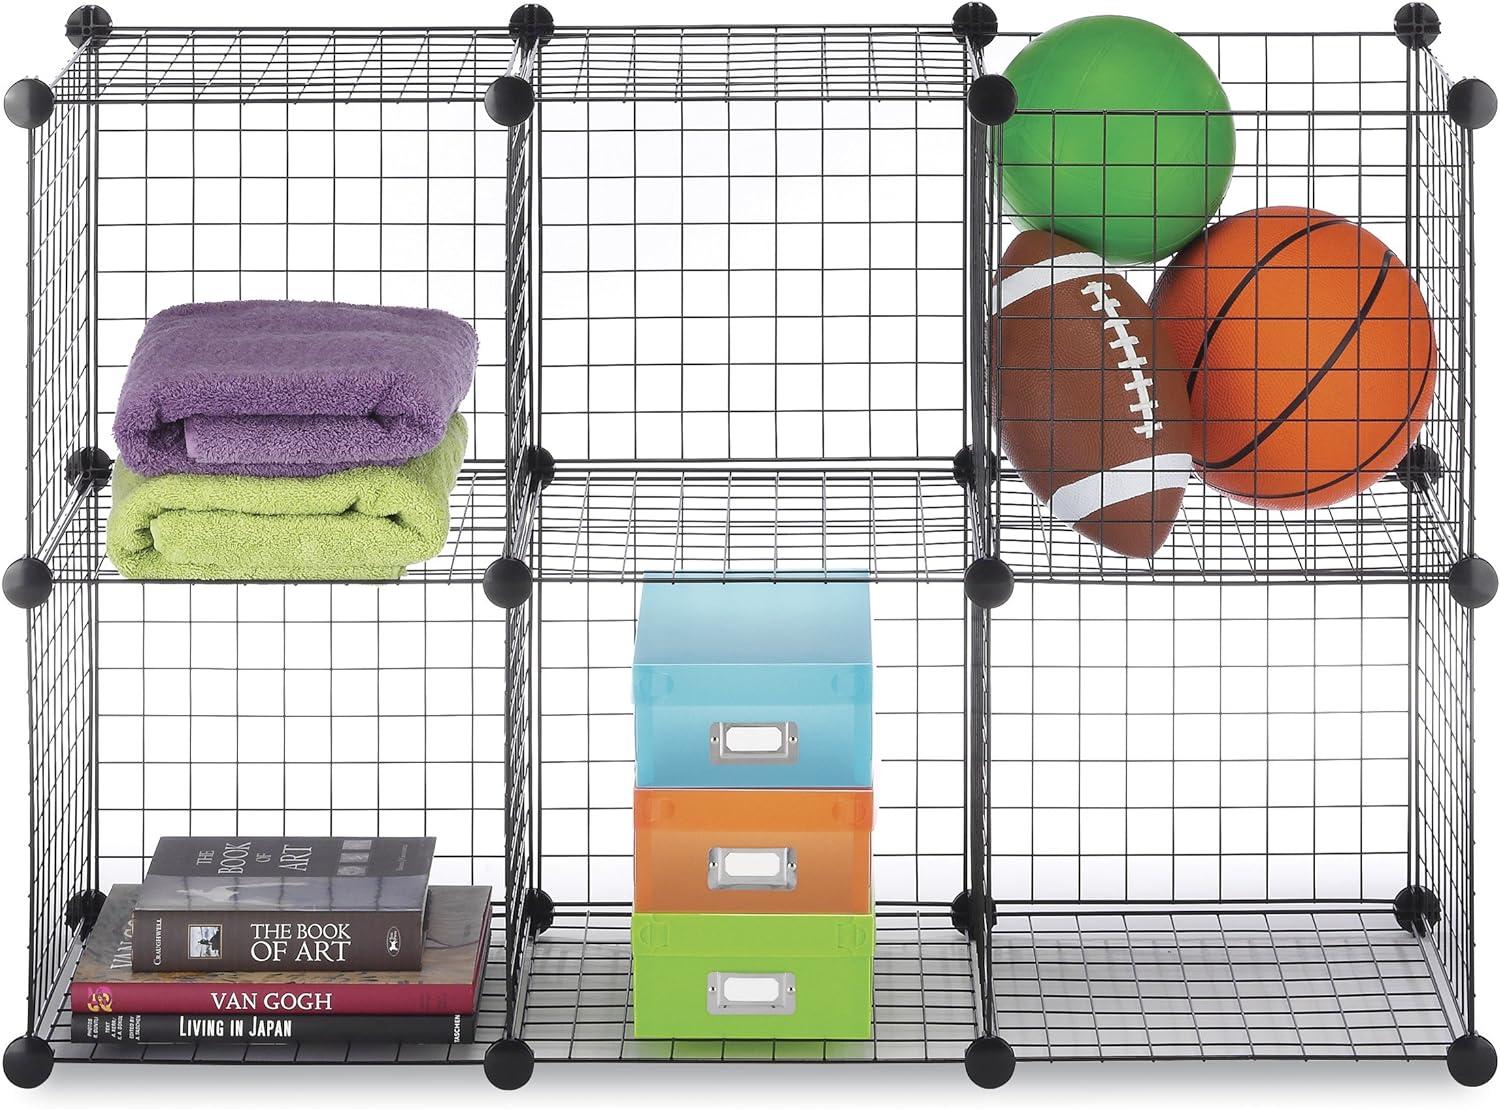 Modular Black Steel Storage Cubes for Kids and Office - Set of 6